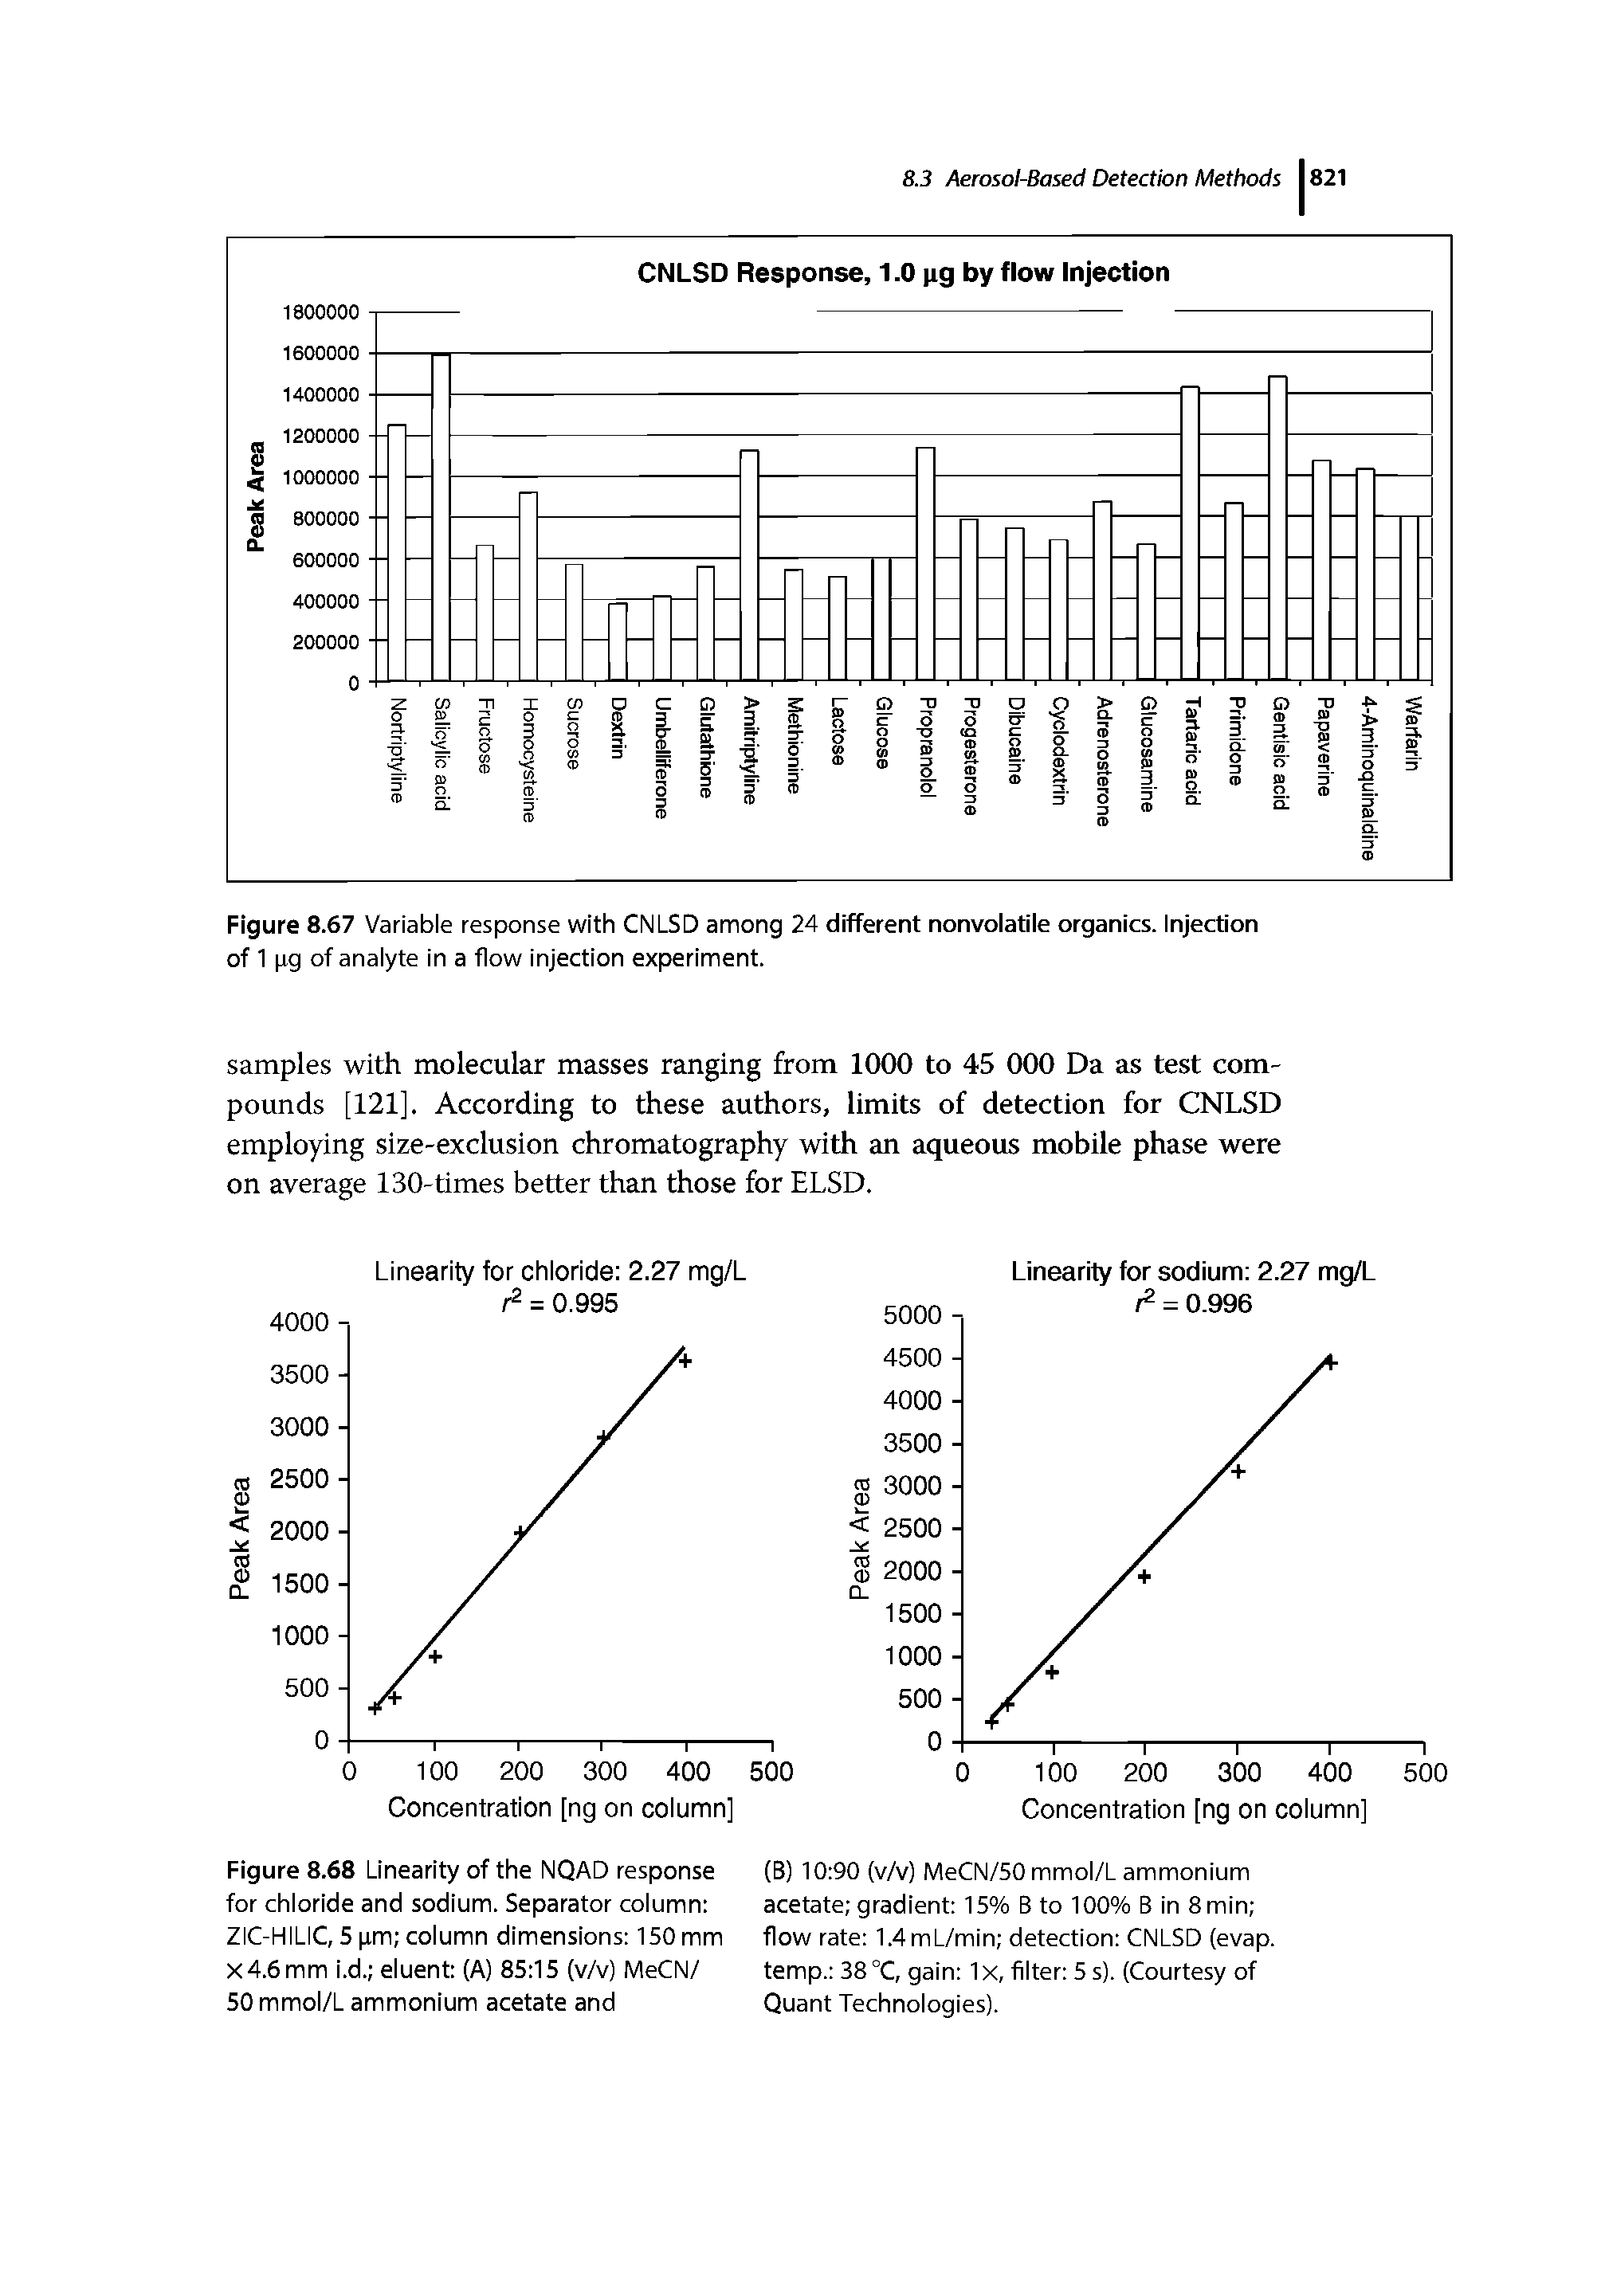 Figure 8.68 Linearity of the NQAD response for chloride and sodium. Separator column ZIC-HILIC, 5 pm column dimensions 150 mm X4.6 mm l.d. eluent (A) 85 15 (v/v) MeCN/ SO mmol/L ammonium acetate and...